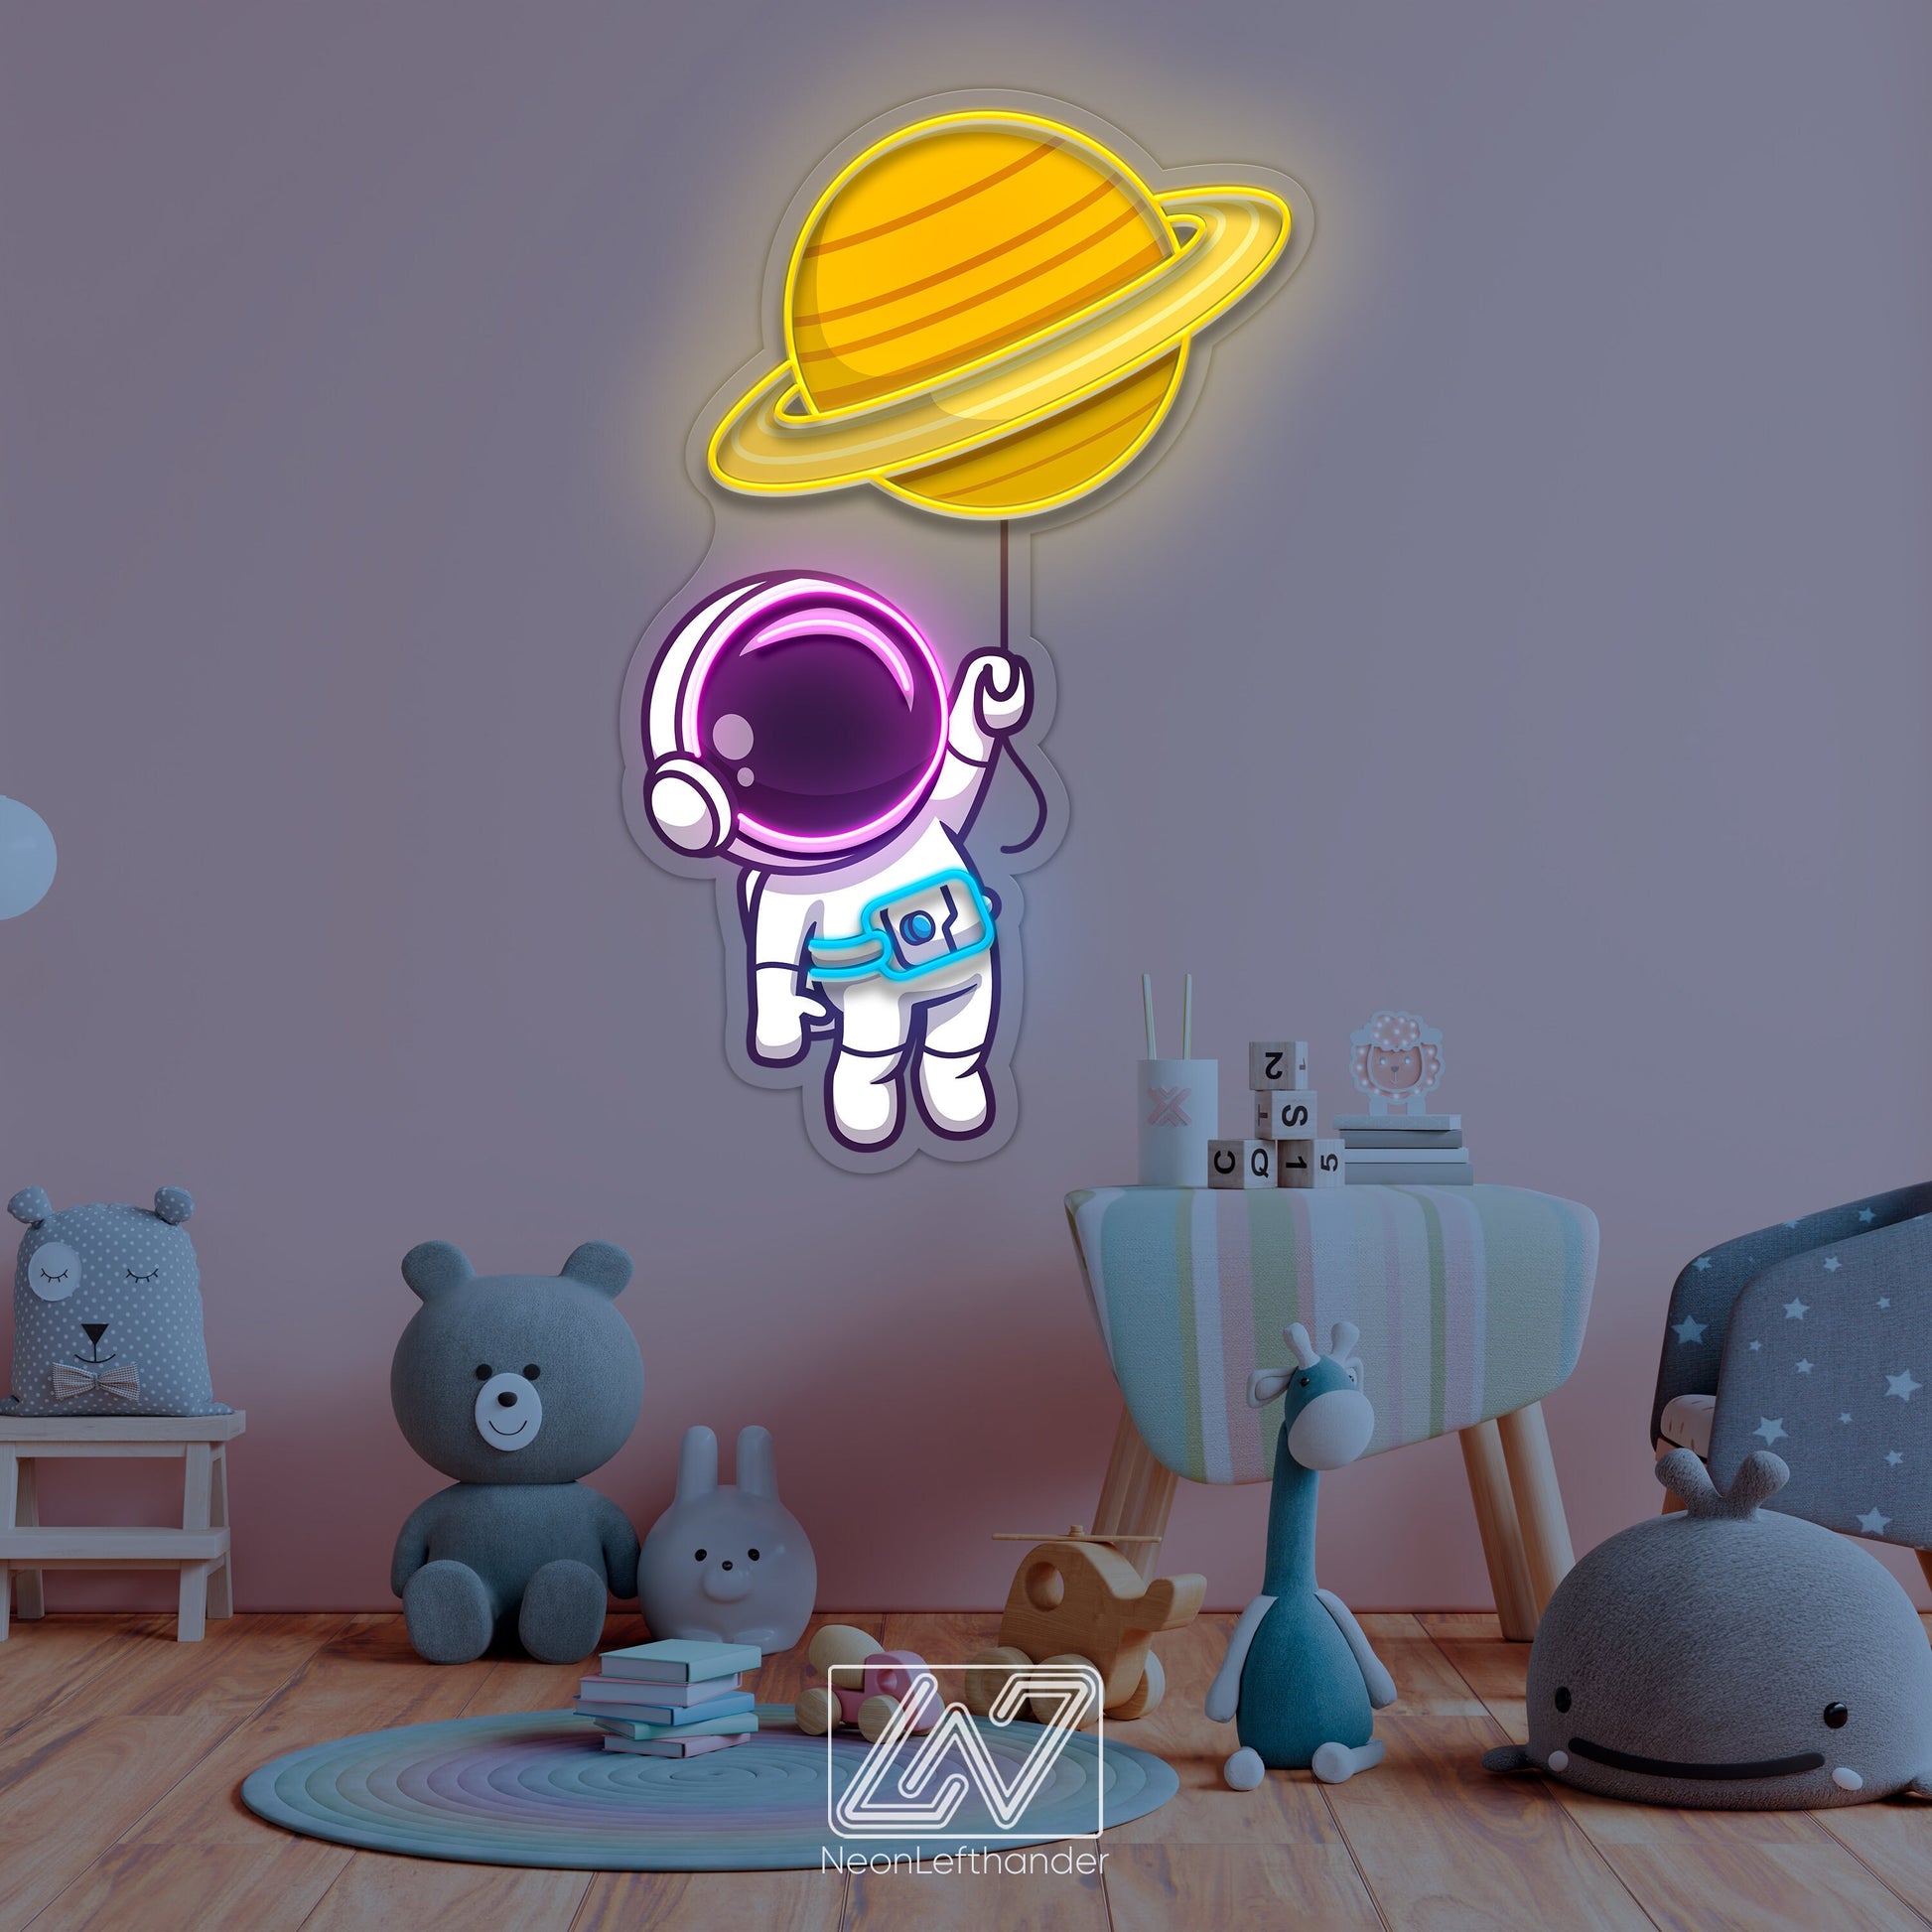 Cute Astronaut Floating with Planet Balloon in Space - Decor for a Child's Room.Neon Sign for Playful Minds.Children's paradise comes alive!